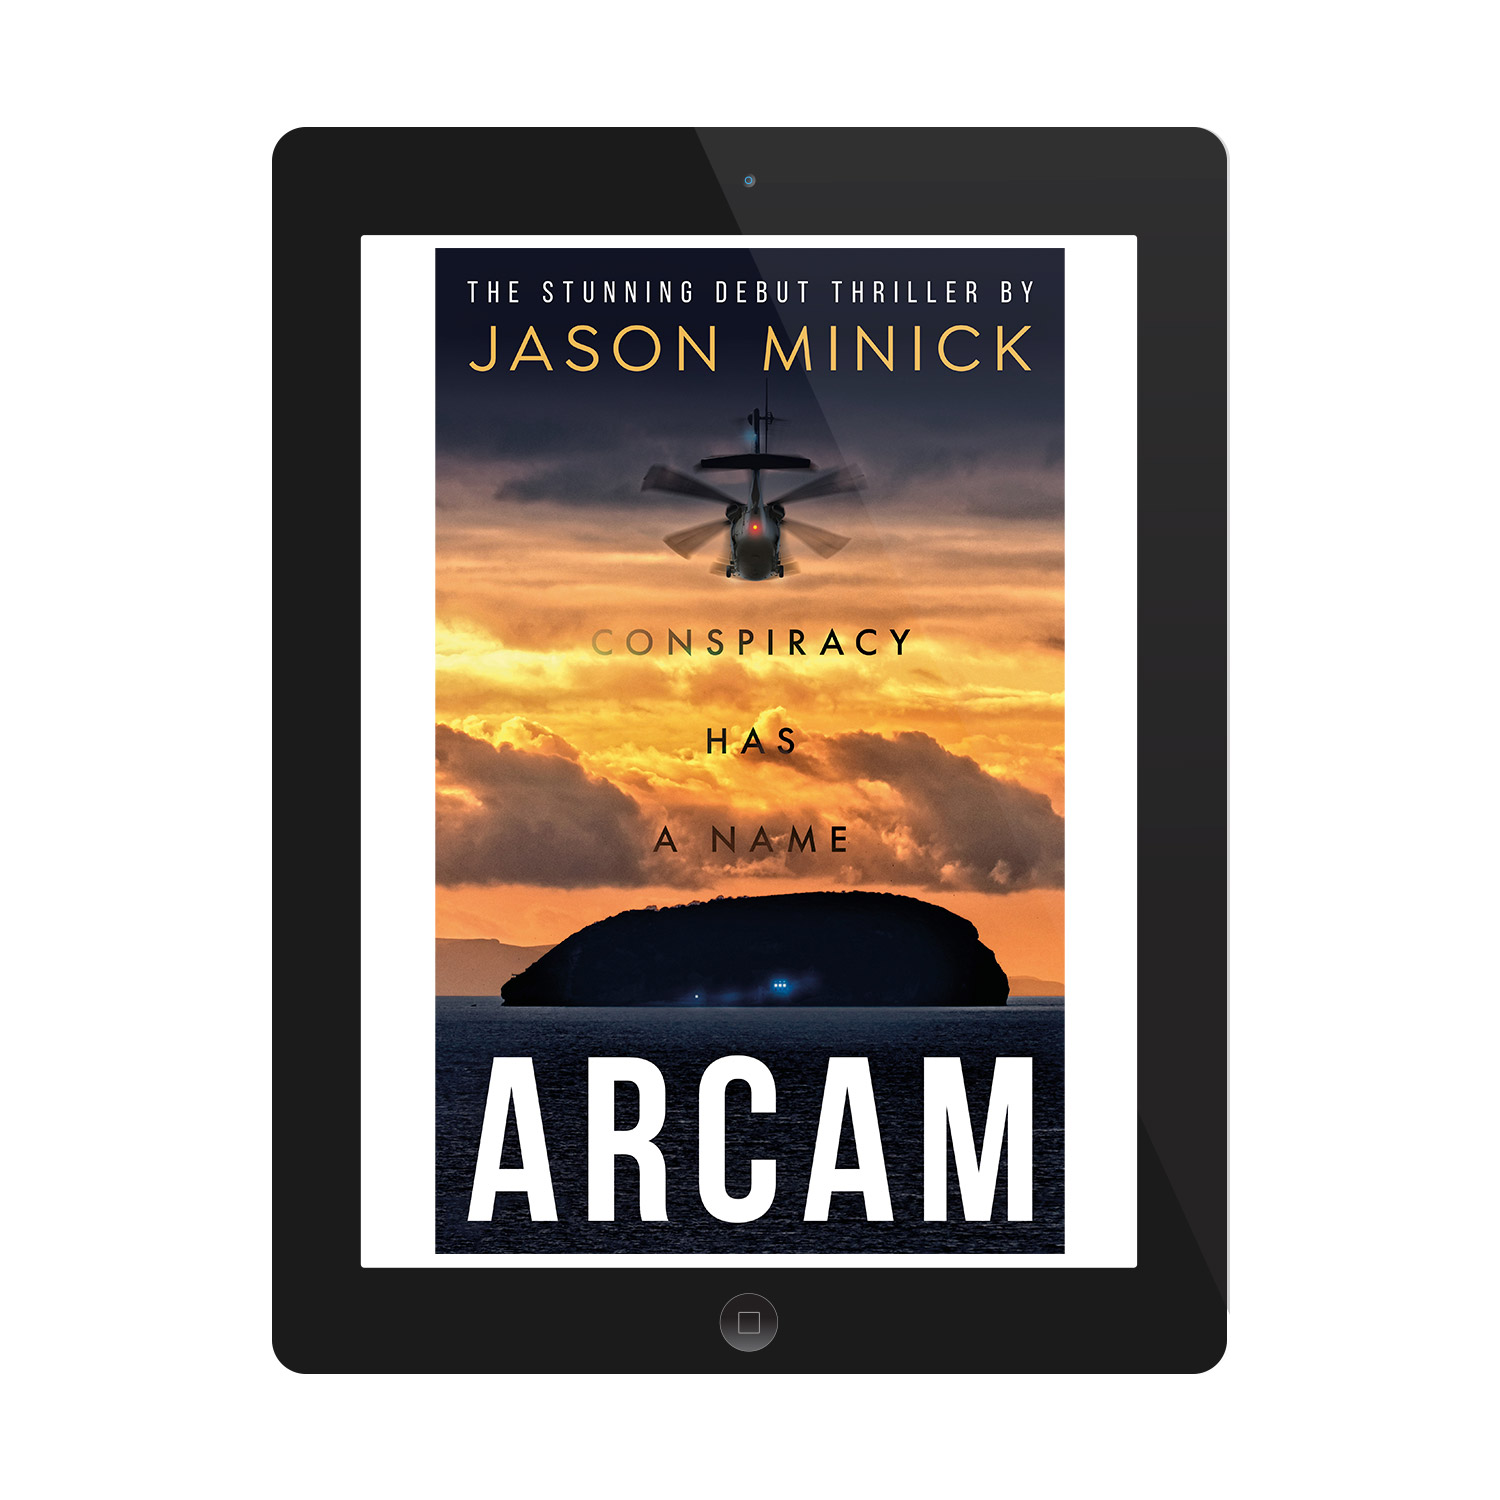 'ARCAM' is a mystery thriller on an epic scale, by Jason Minick. The book cover and interior were designed by Mark Thomas, of coverness.com. To find out more about my book design services, please visit www.coverness.com.